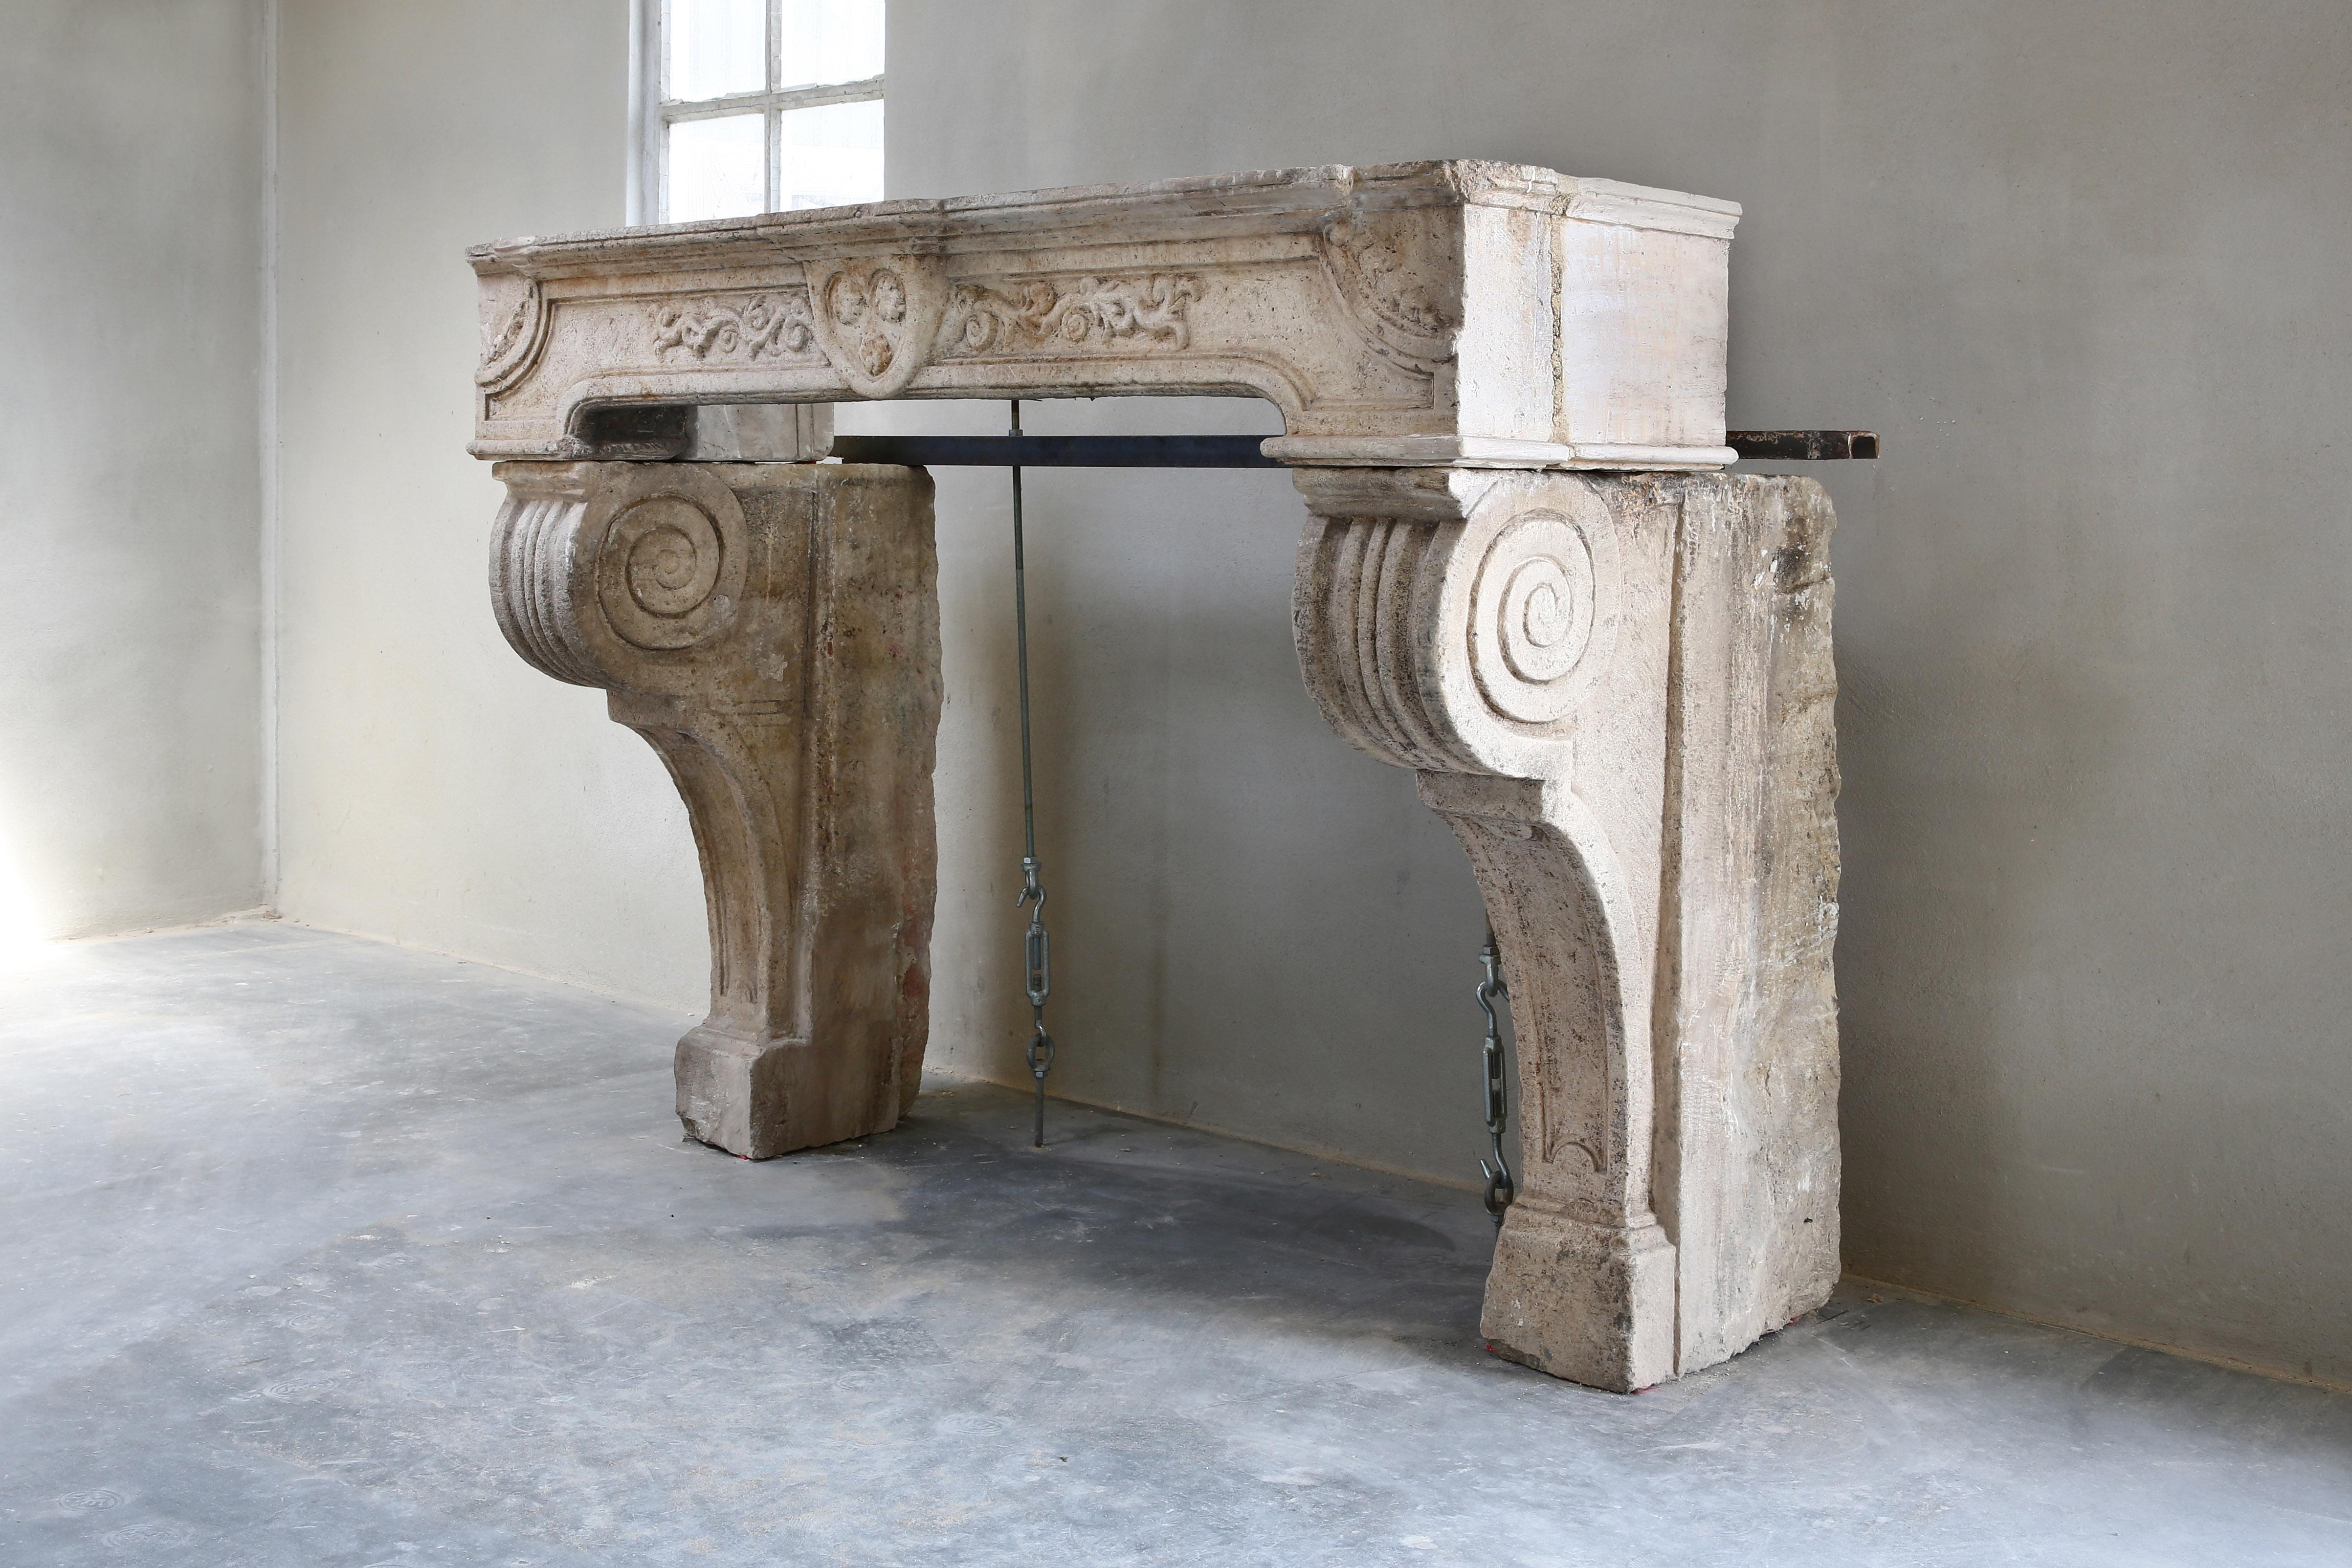 Antique French limestone fireplace from the 18th century, from the time of the Renaissance. This beautiful fireplace is more than 200 years old and is richly decorated with various ornaments and lines. The fireplace has a beautiful molding and is